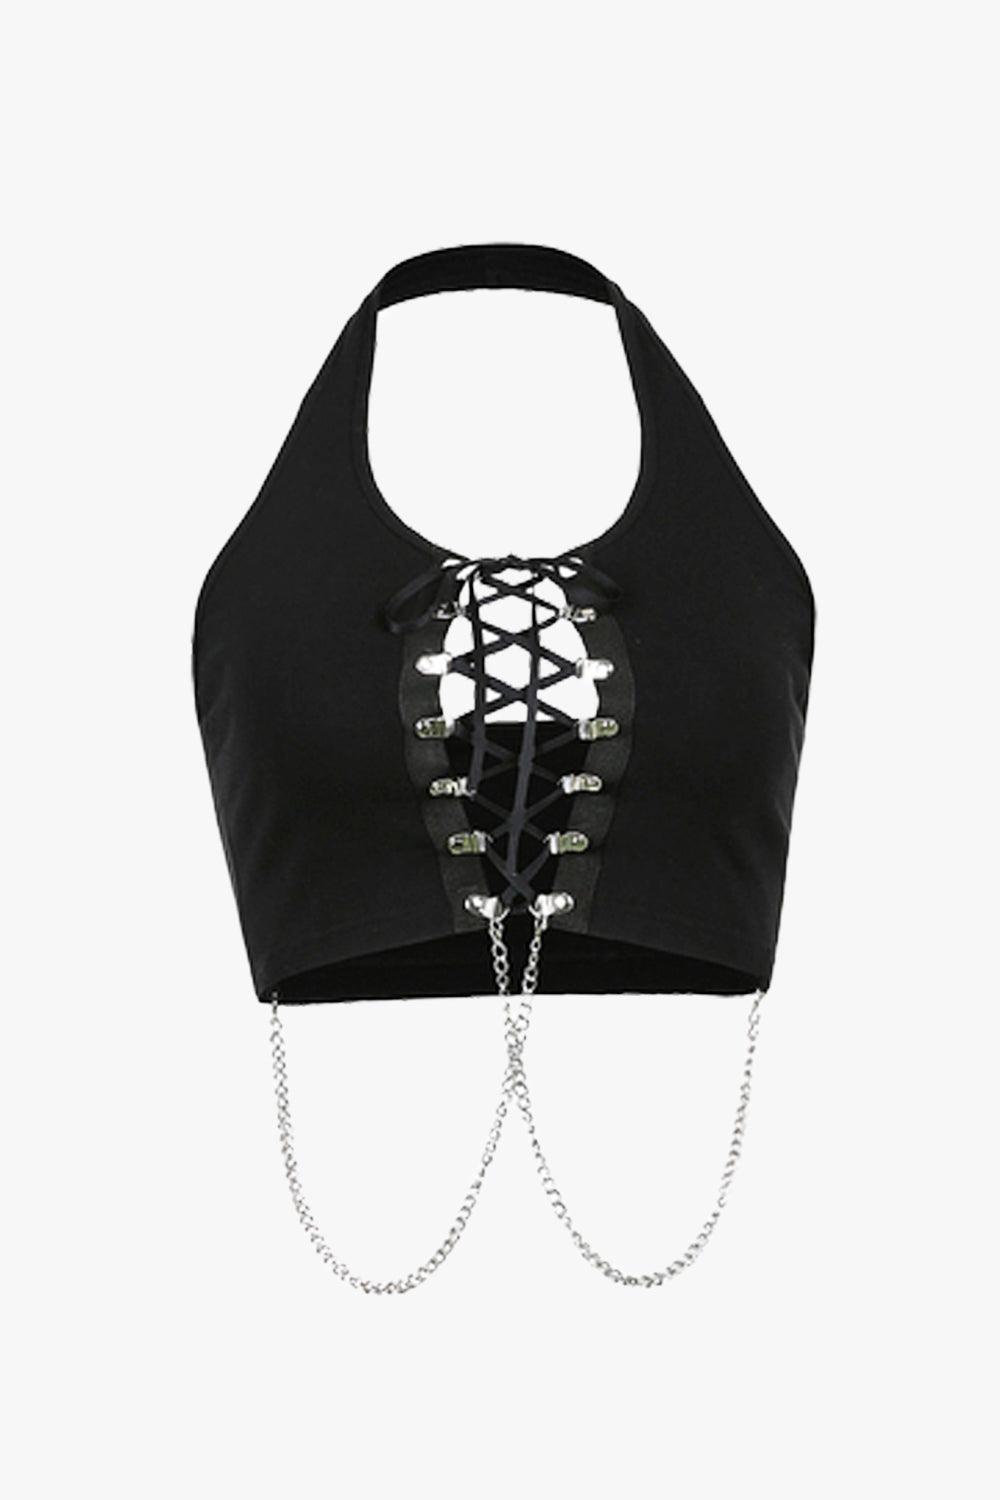 Chest Chains Crop Top Grunge Aesthetic • Aesthetic Clothes M / Black